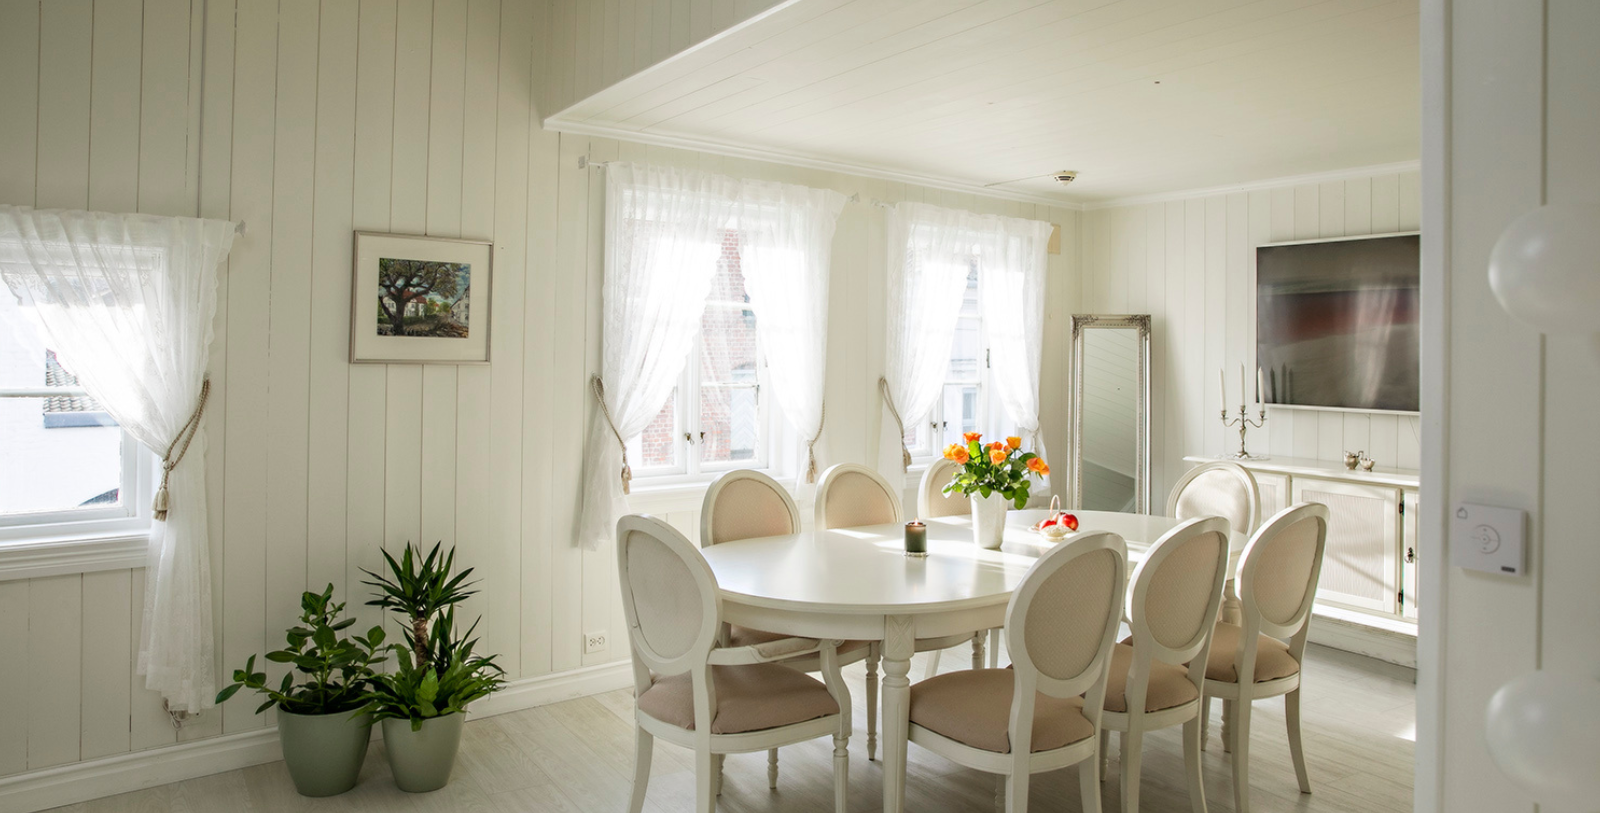 Discover the inviting charm of Gamlebyen Hotell Fredrikstad, a former merchant’s home turned intimate boutique hotel.